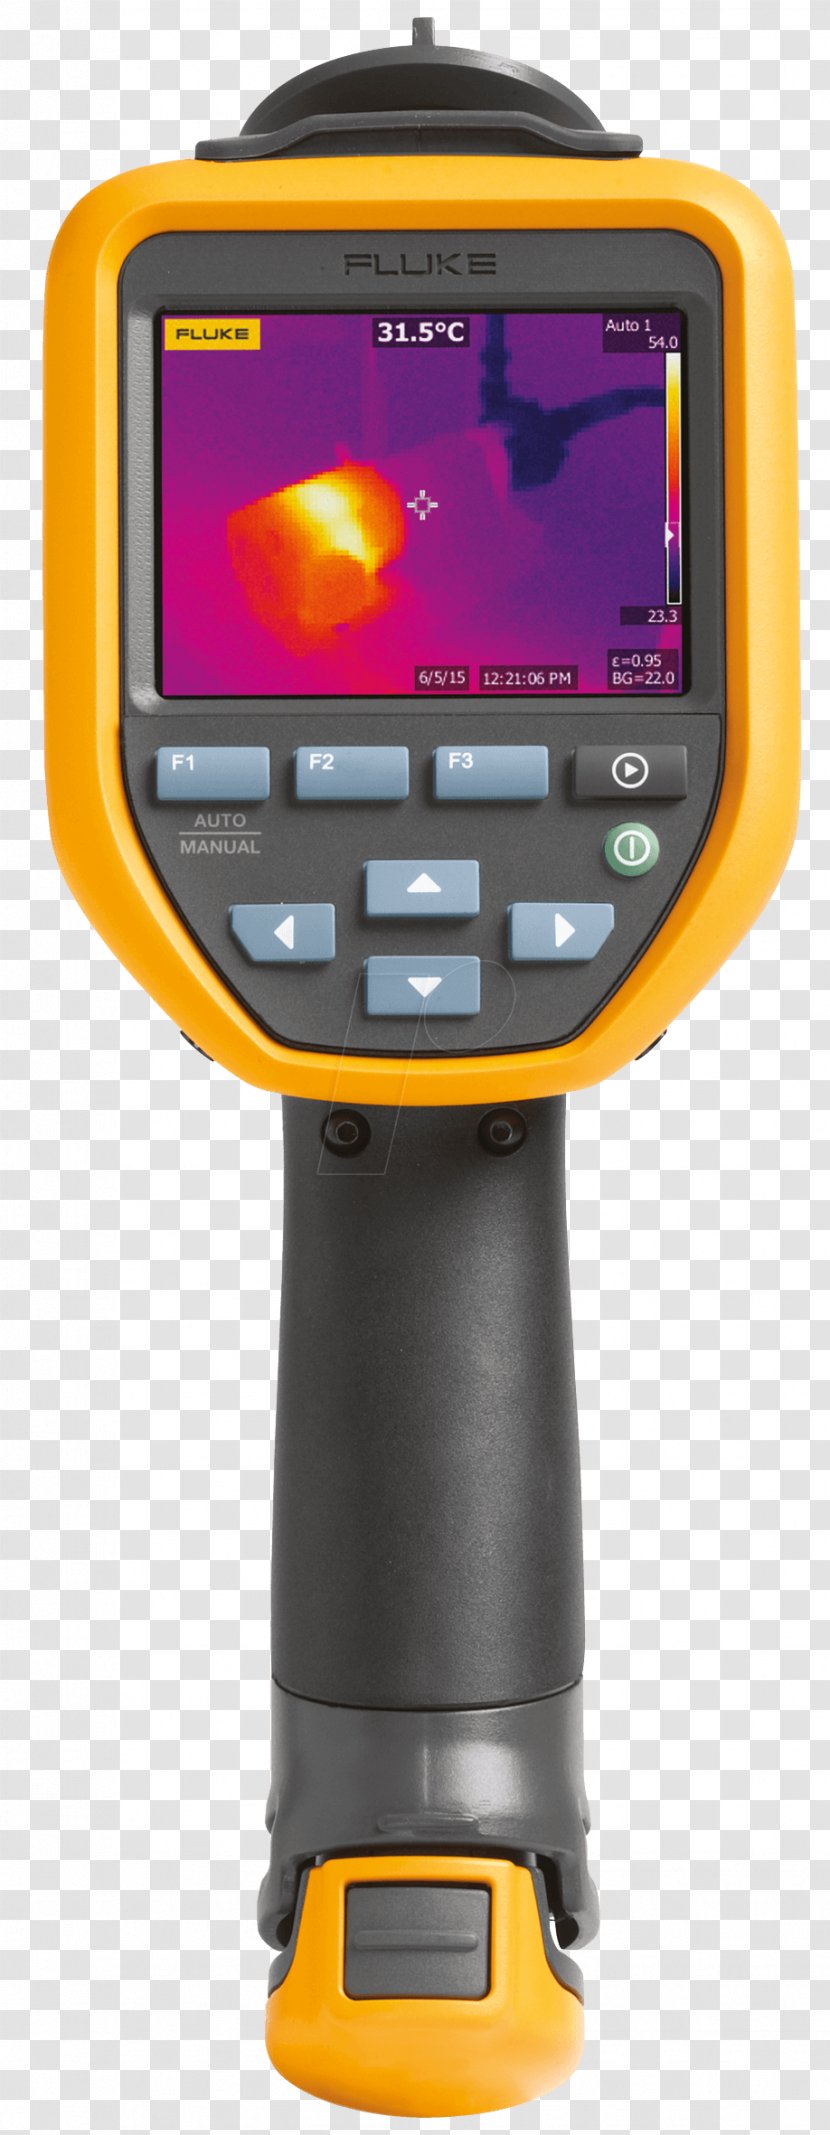 Thermographic Camera Fluke Corporation Thermography Thermal Imaging - Infrared Photography - Electronic Scales Transparent PNG